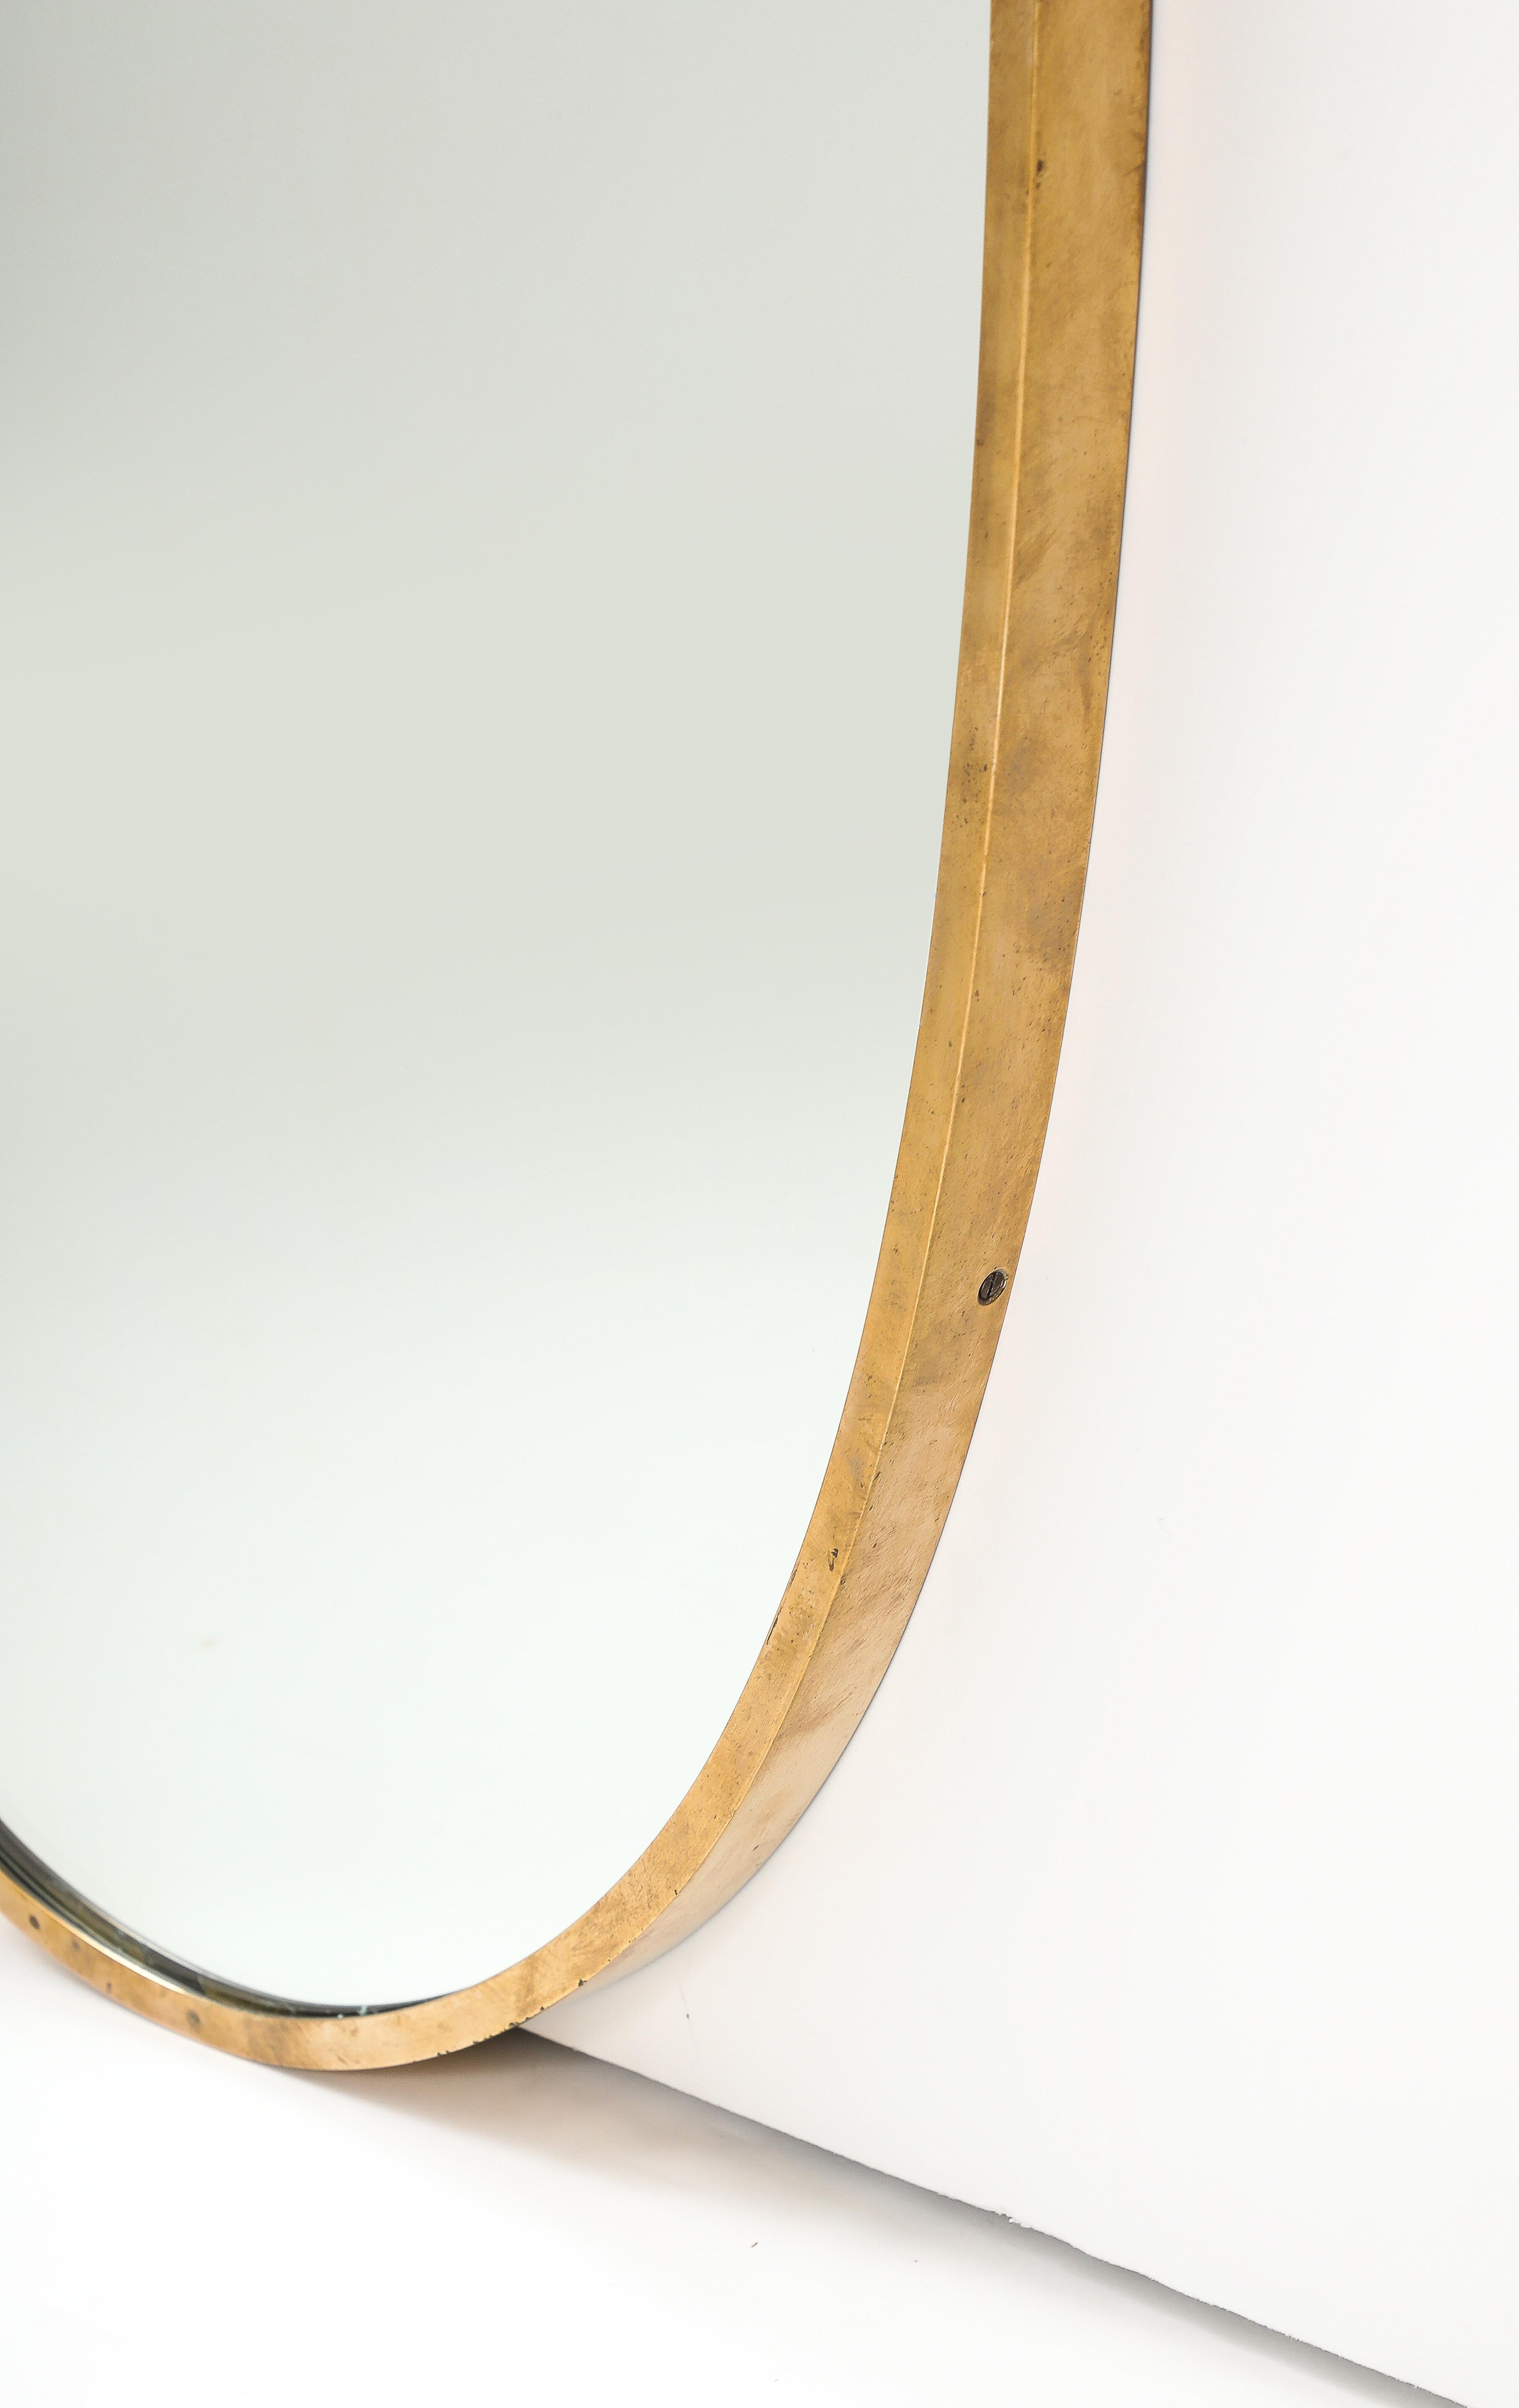 Italian Modernist Mirror with Brass Frame, Italy, c. 1950 For Sale 5